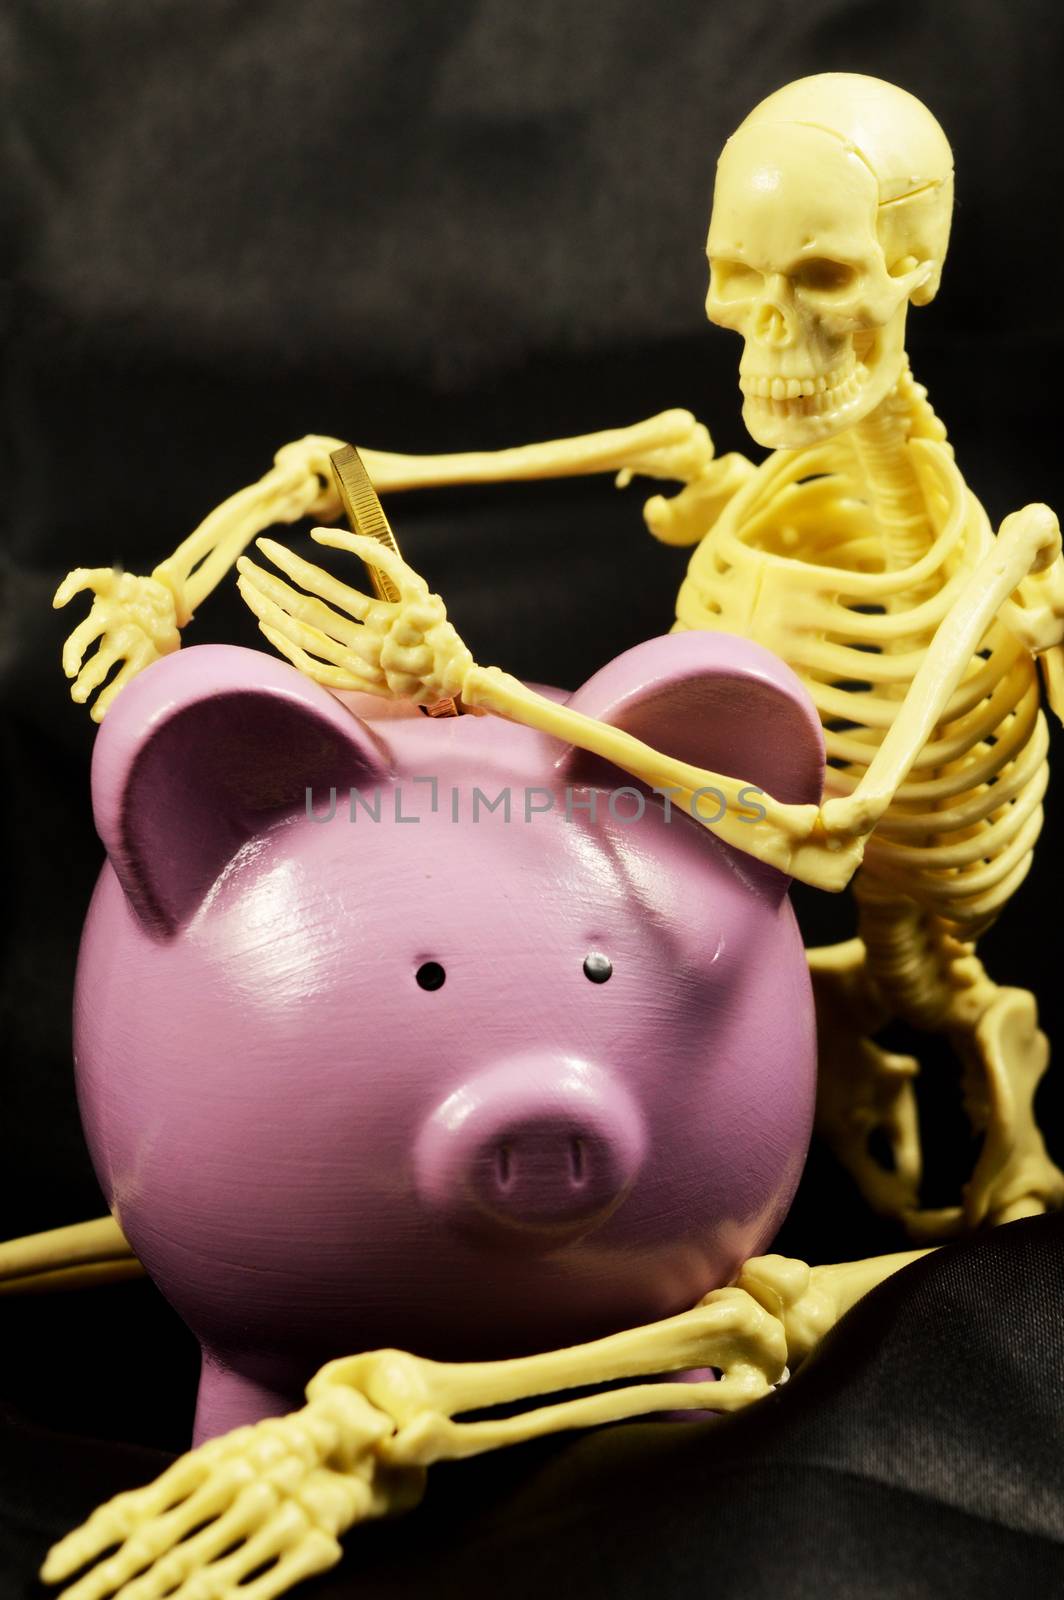 A skeleton guards his piggy bank while representing his scarcity of money and weath.